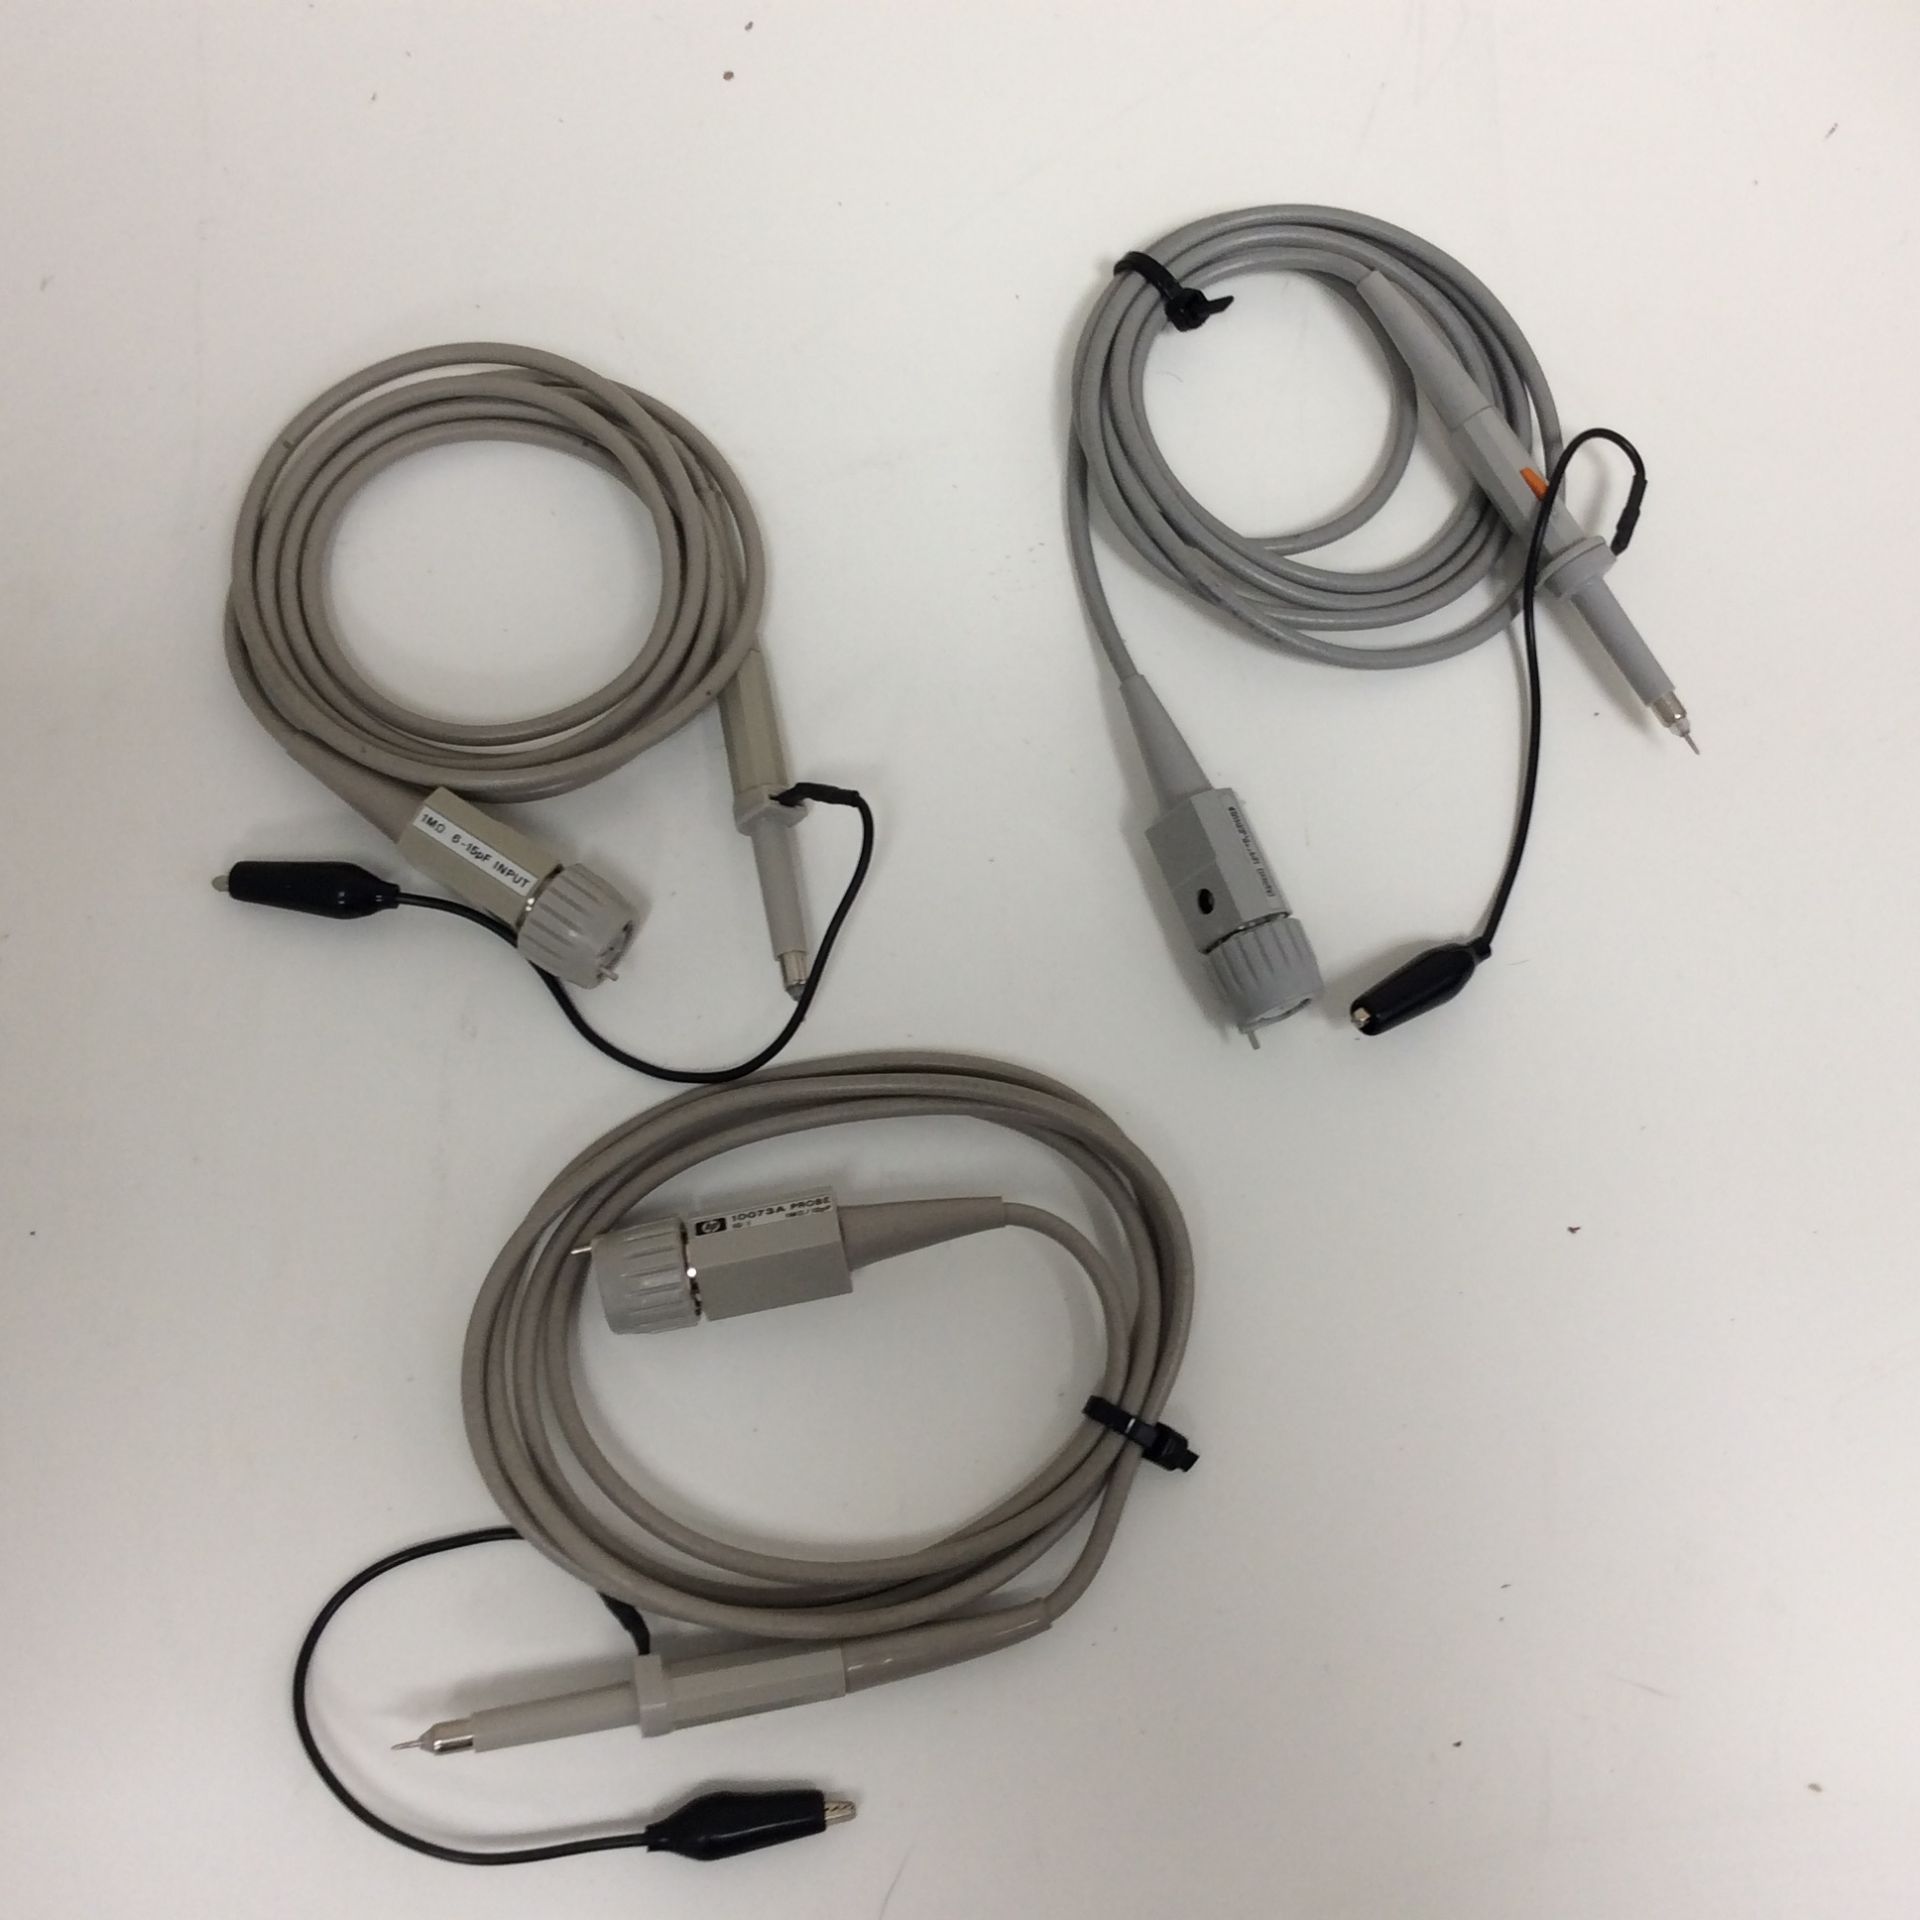 3x hp probe to inc 10073a x2 and 10073b